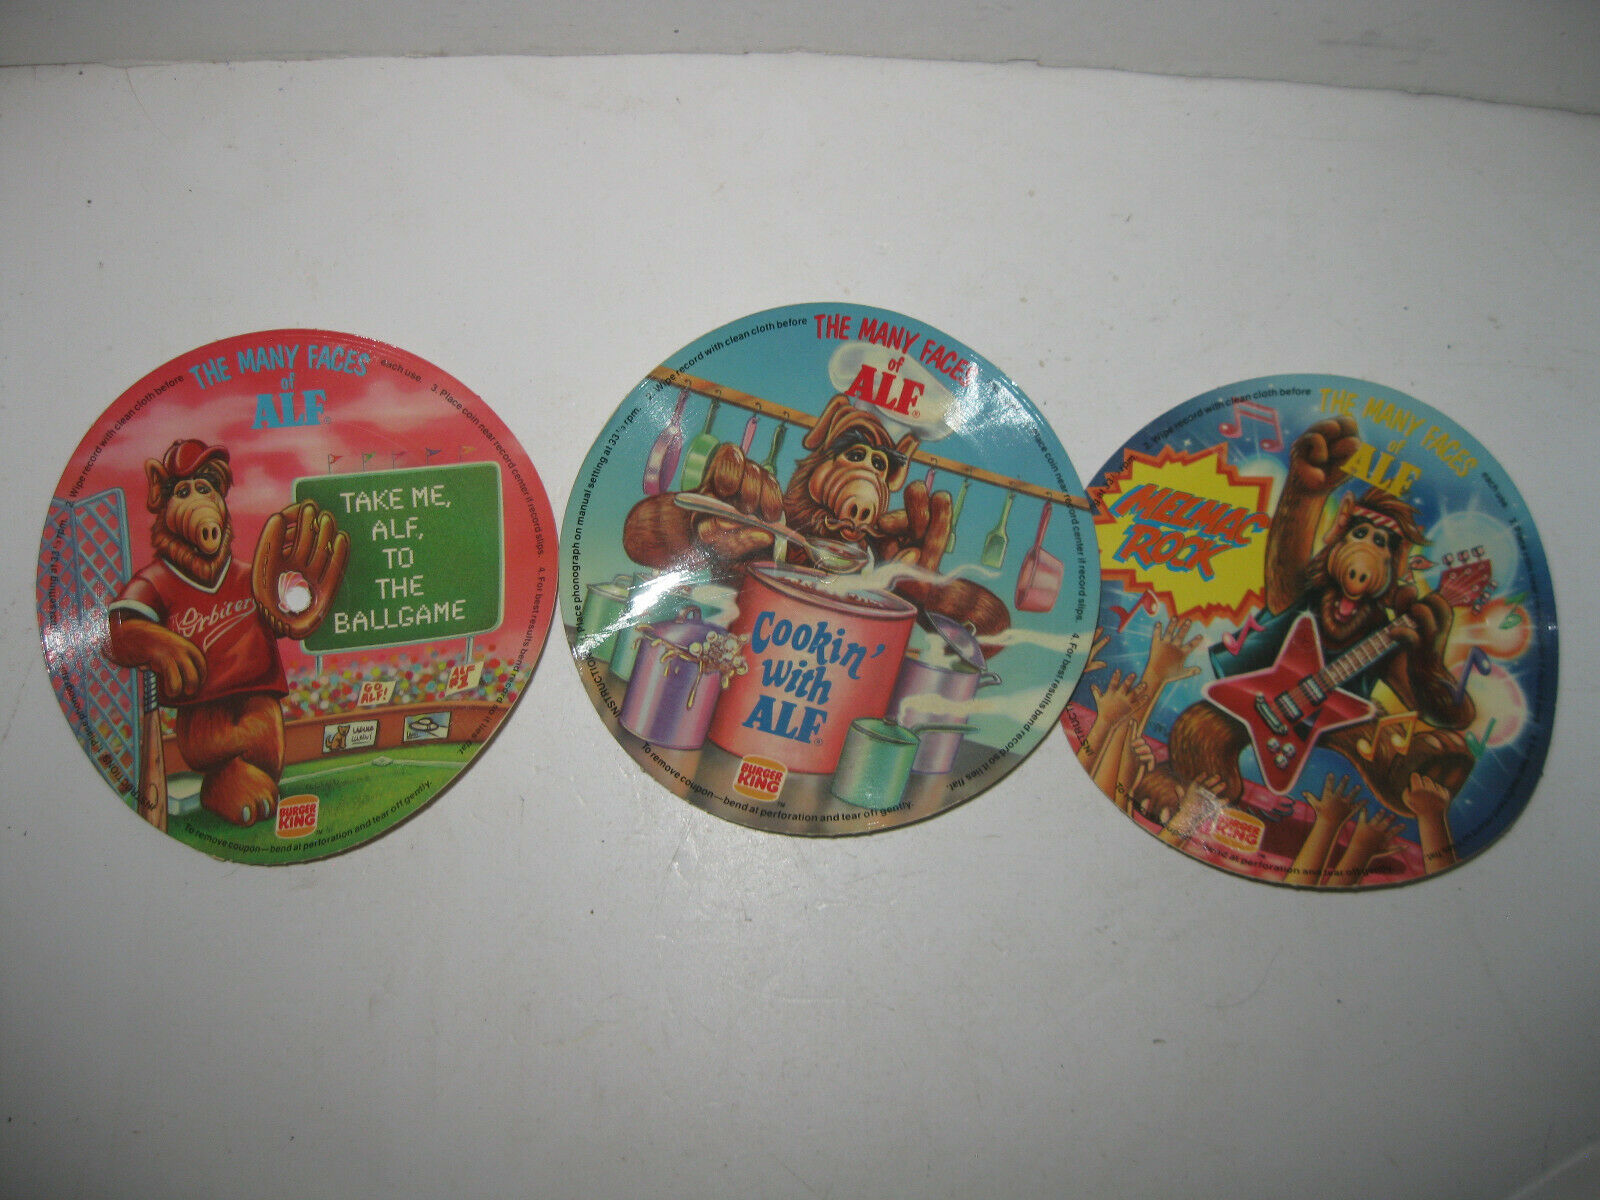 Vintage Alf Buger King Promo Records -2 Have Never Been Played